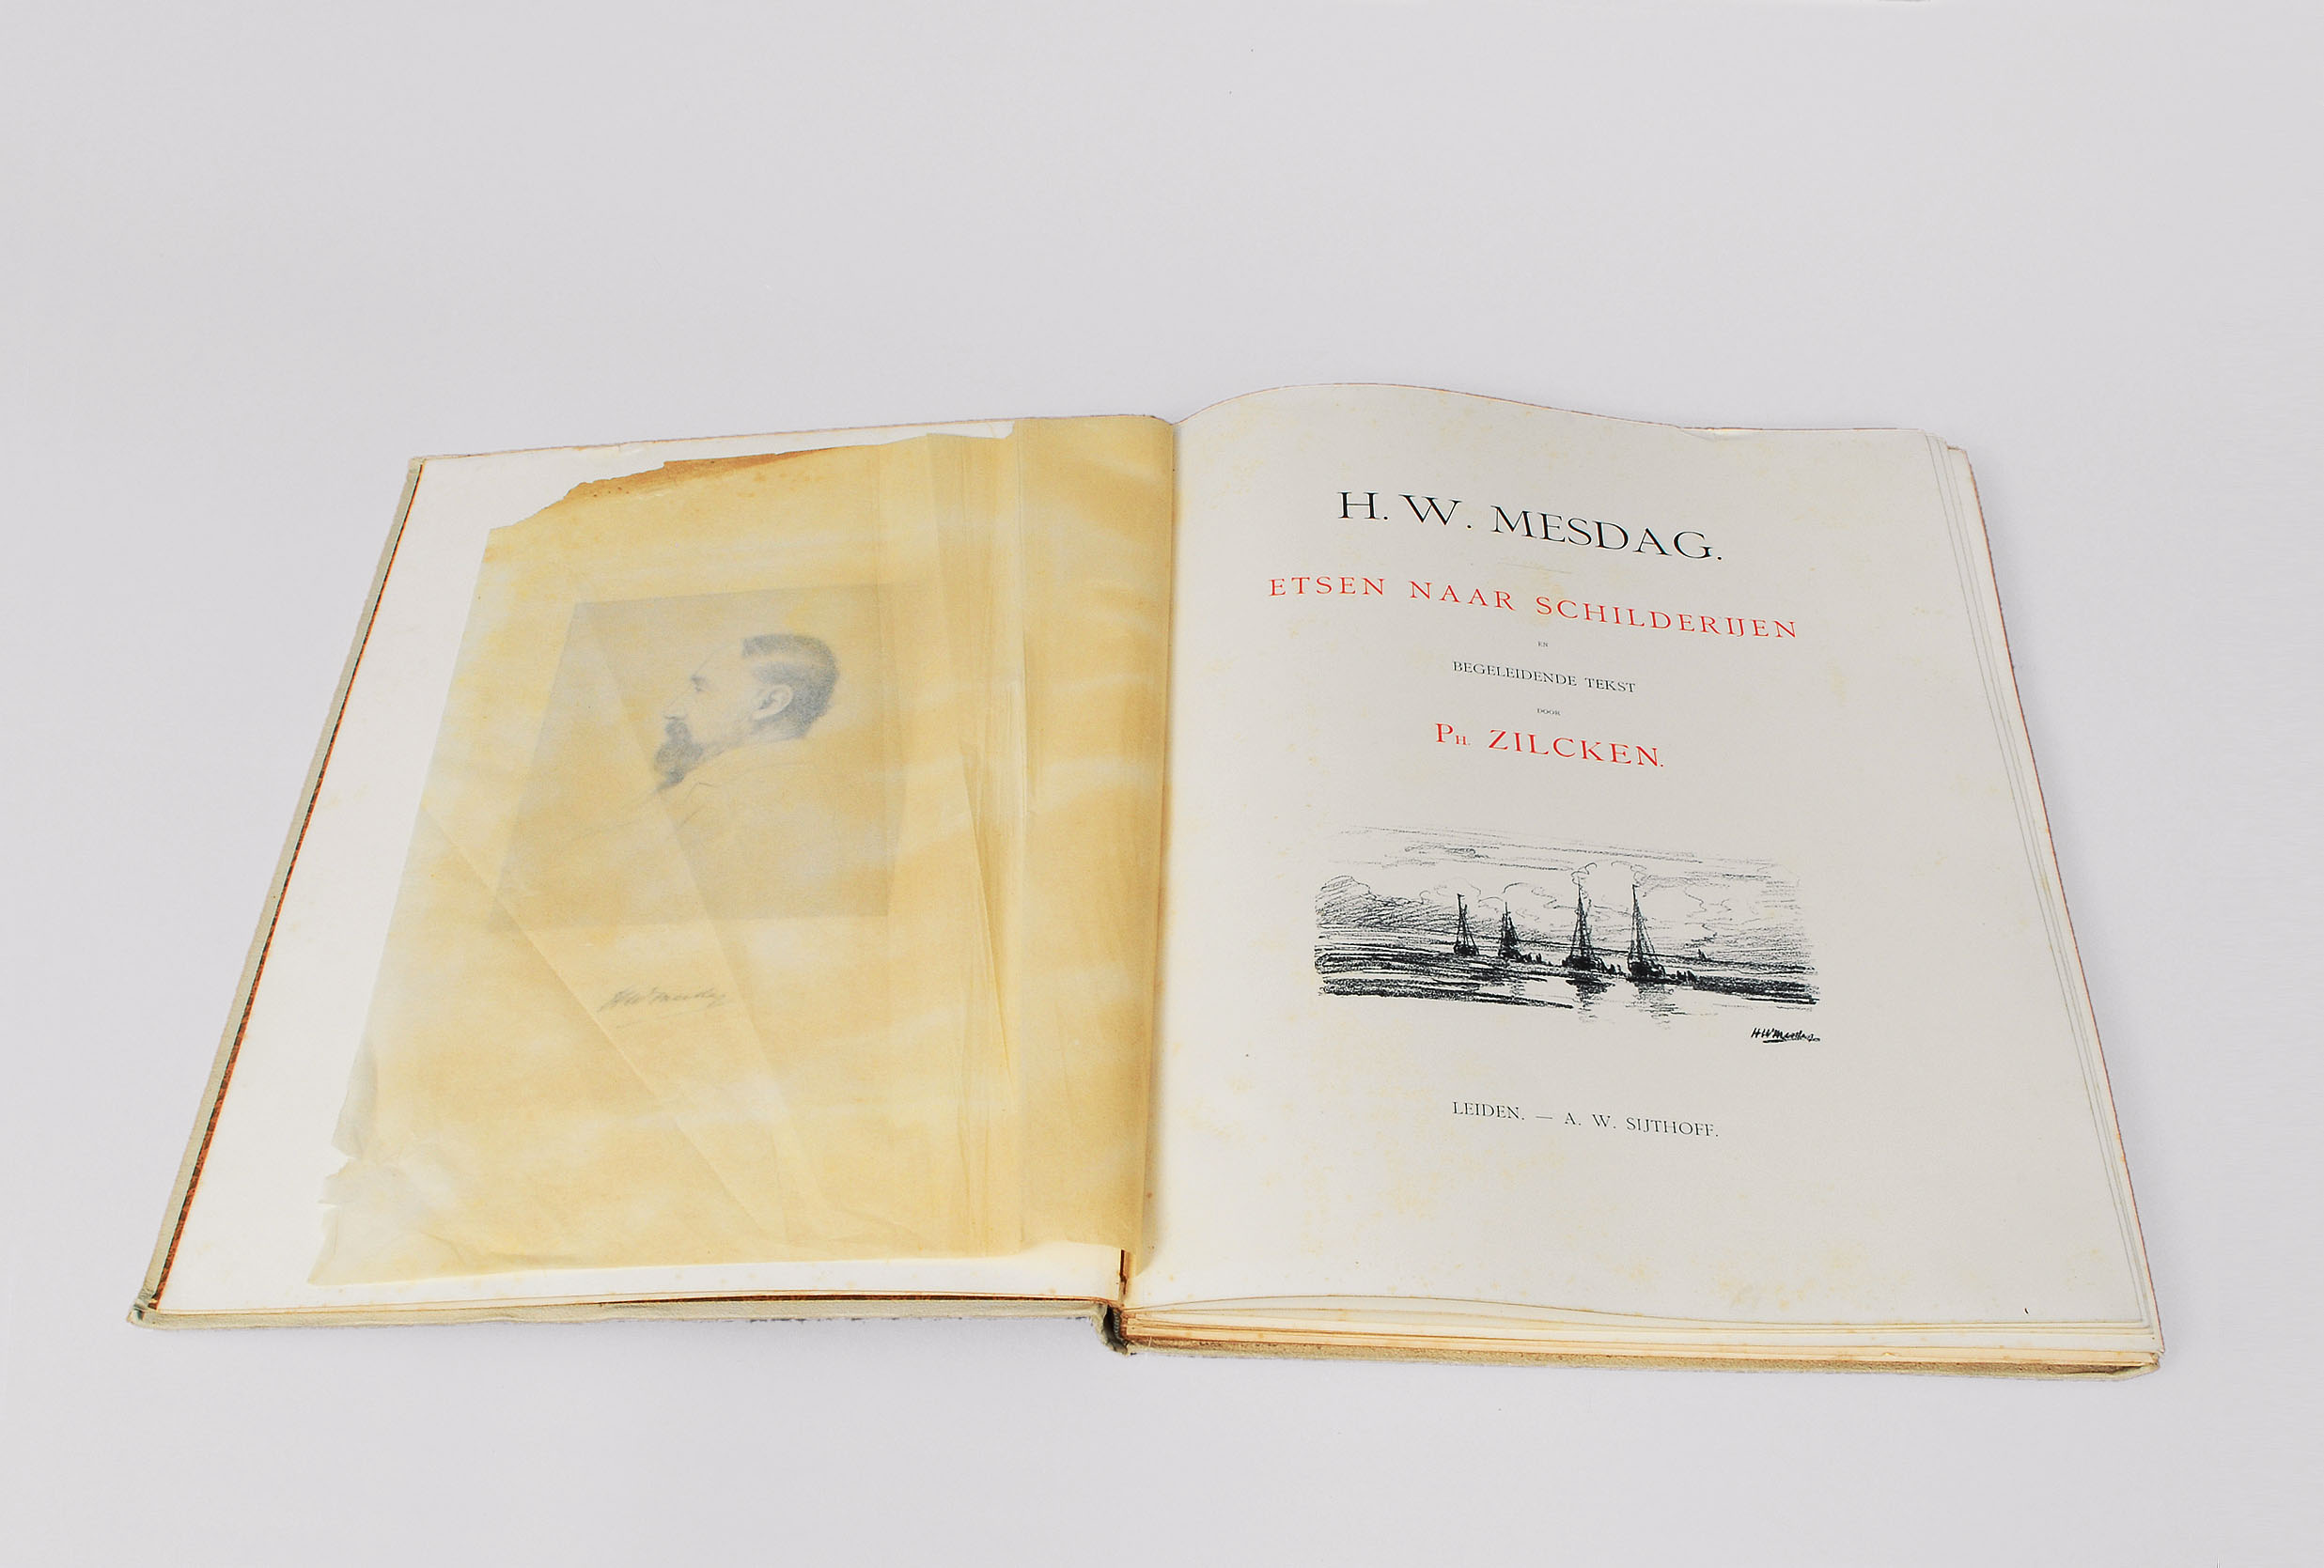 A book with 9 original etchings